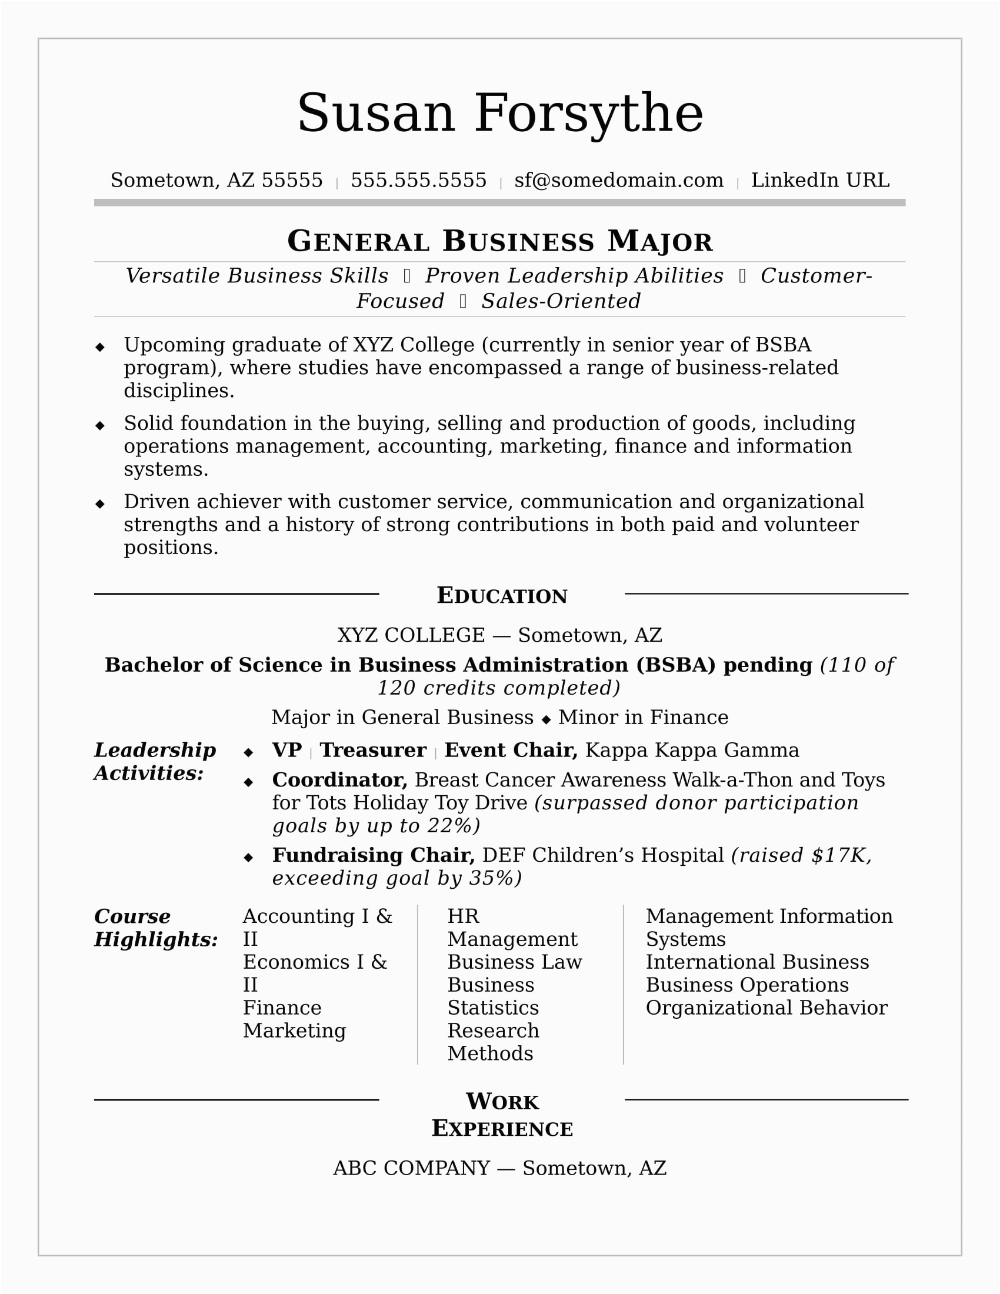 Resume Samples for High School Students Applying to College College Resume Sample